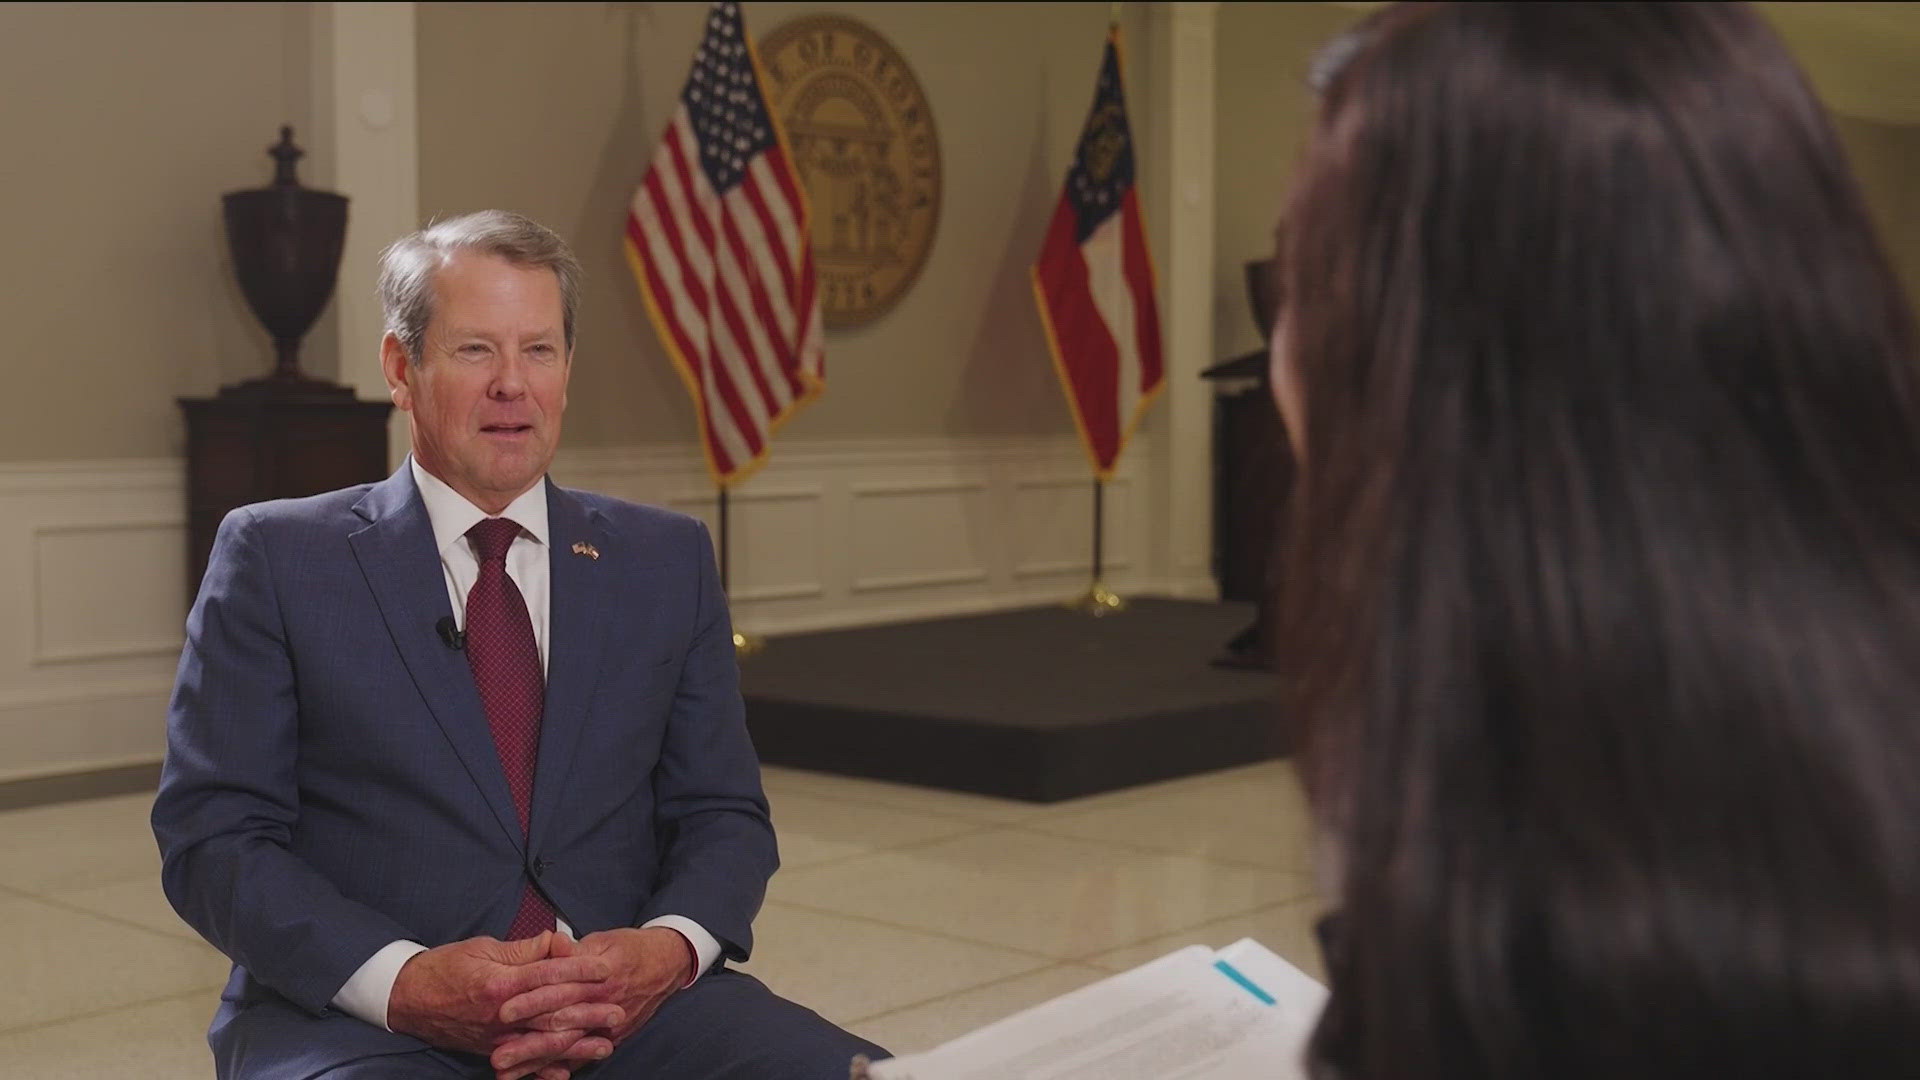 Georgia Gov. Brian Kemp sat down with 11Alive and discussed whether he would be supporting Donald Trump for president.